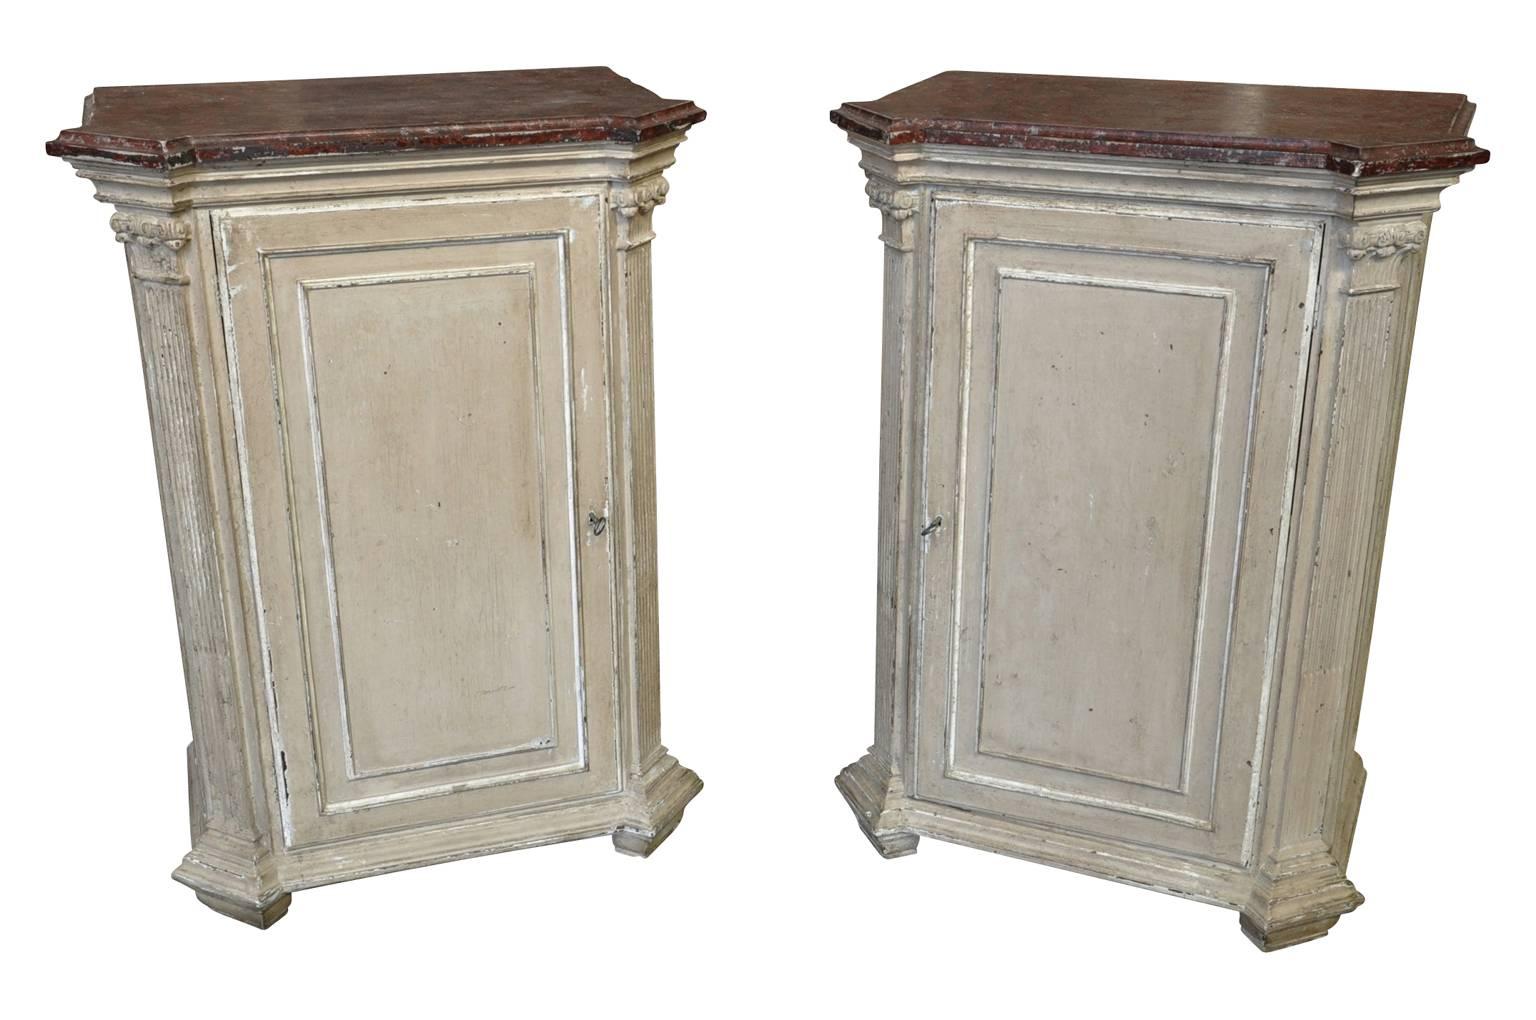 A fabulous pair of French Louis XVI style side cabinets from the Provence region. Beautifully constructed from painted wood with outstanding faux marble painted top surfaces.